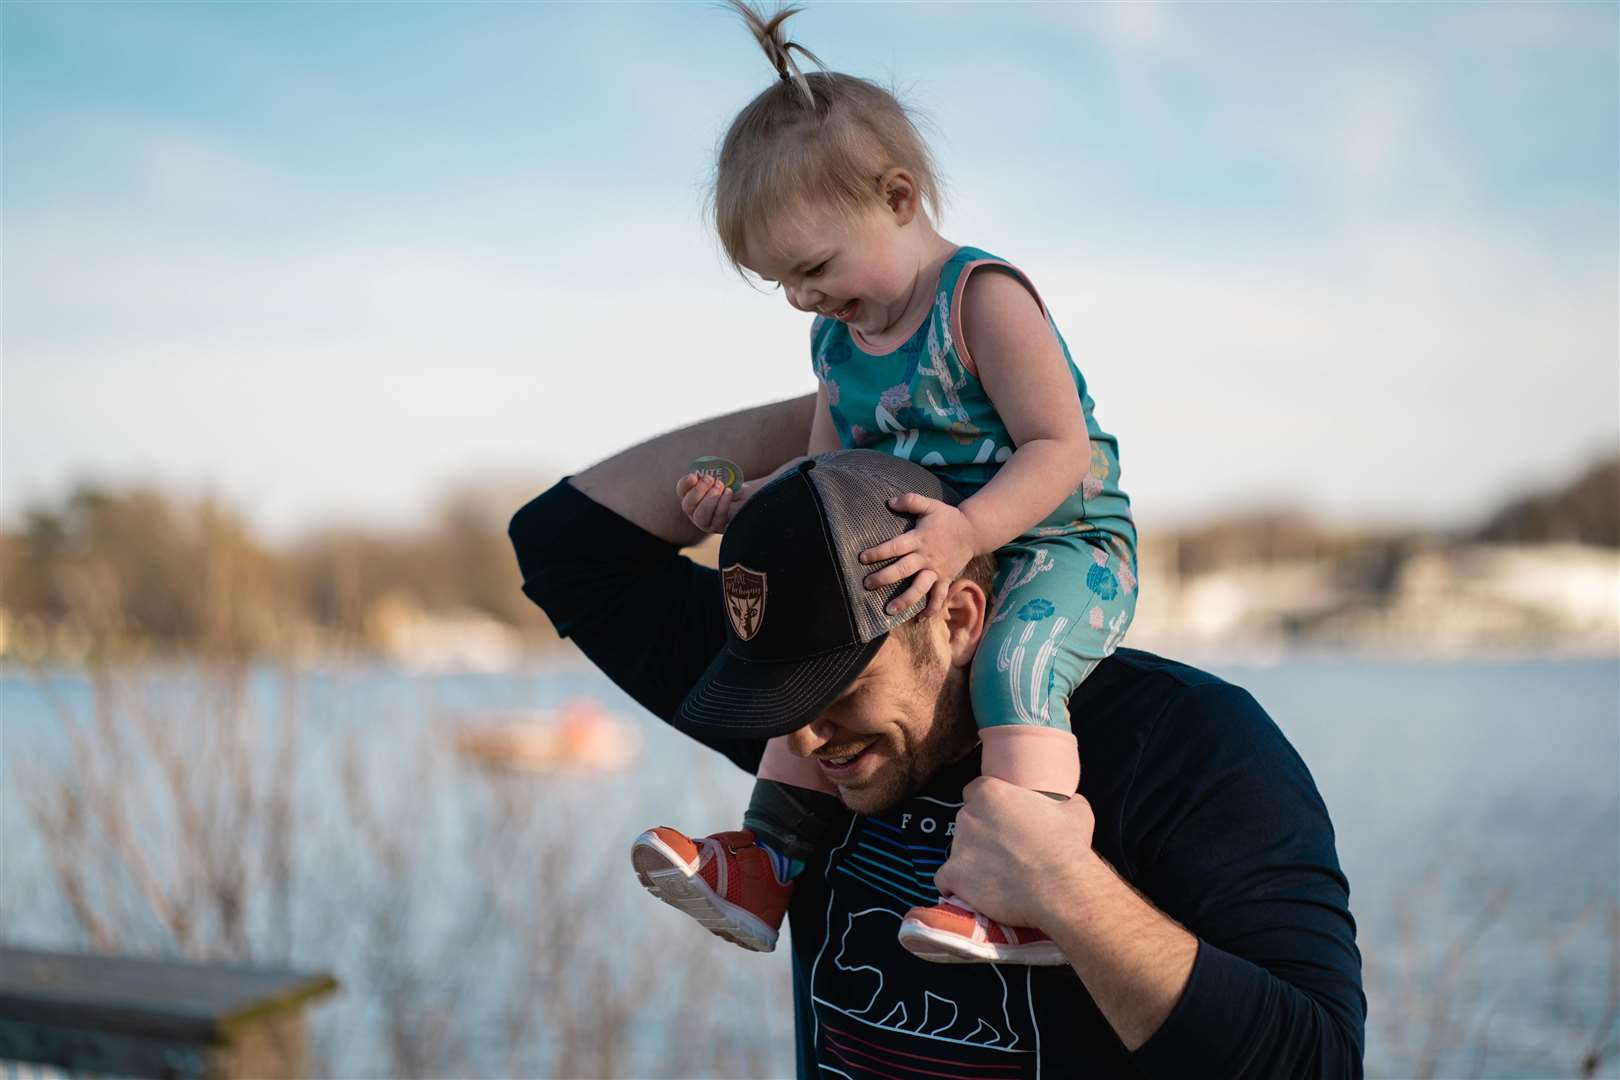 Father's Day falls on Sunday, June 20 this year. Picture by: Josh Willink, Pexels.